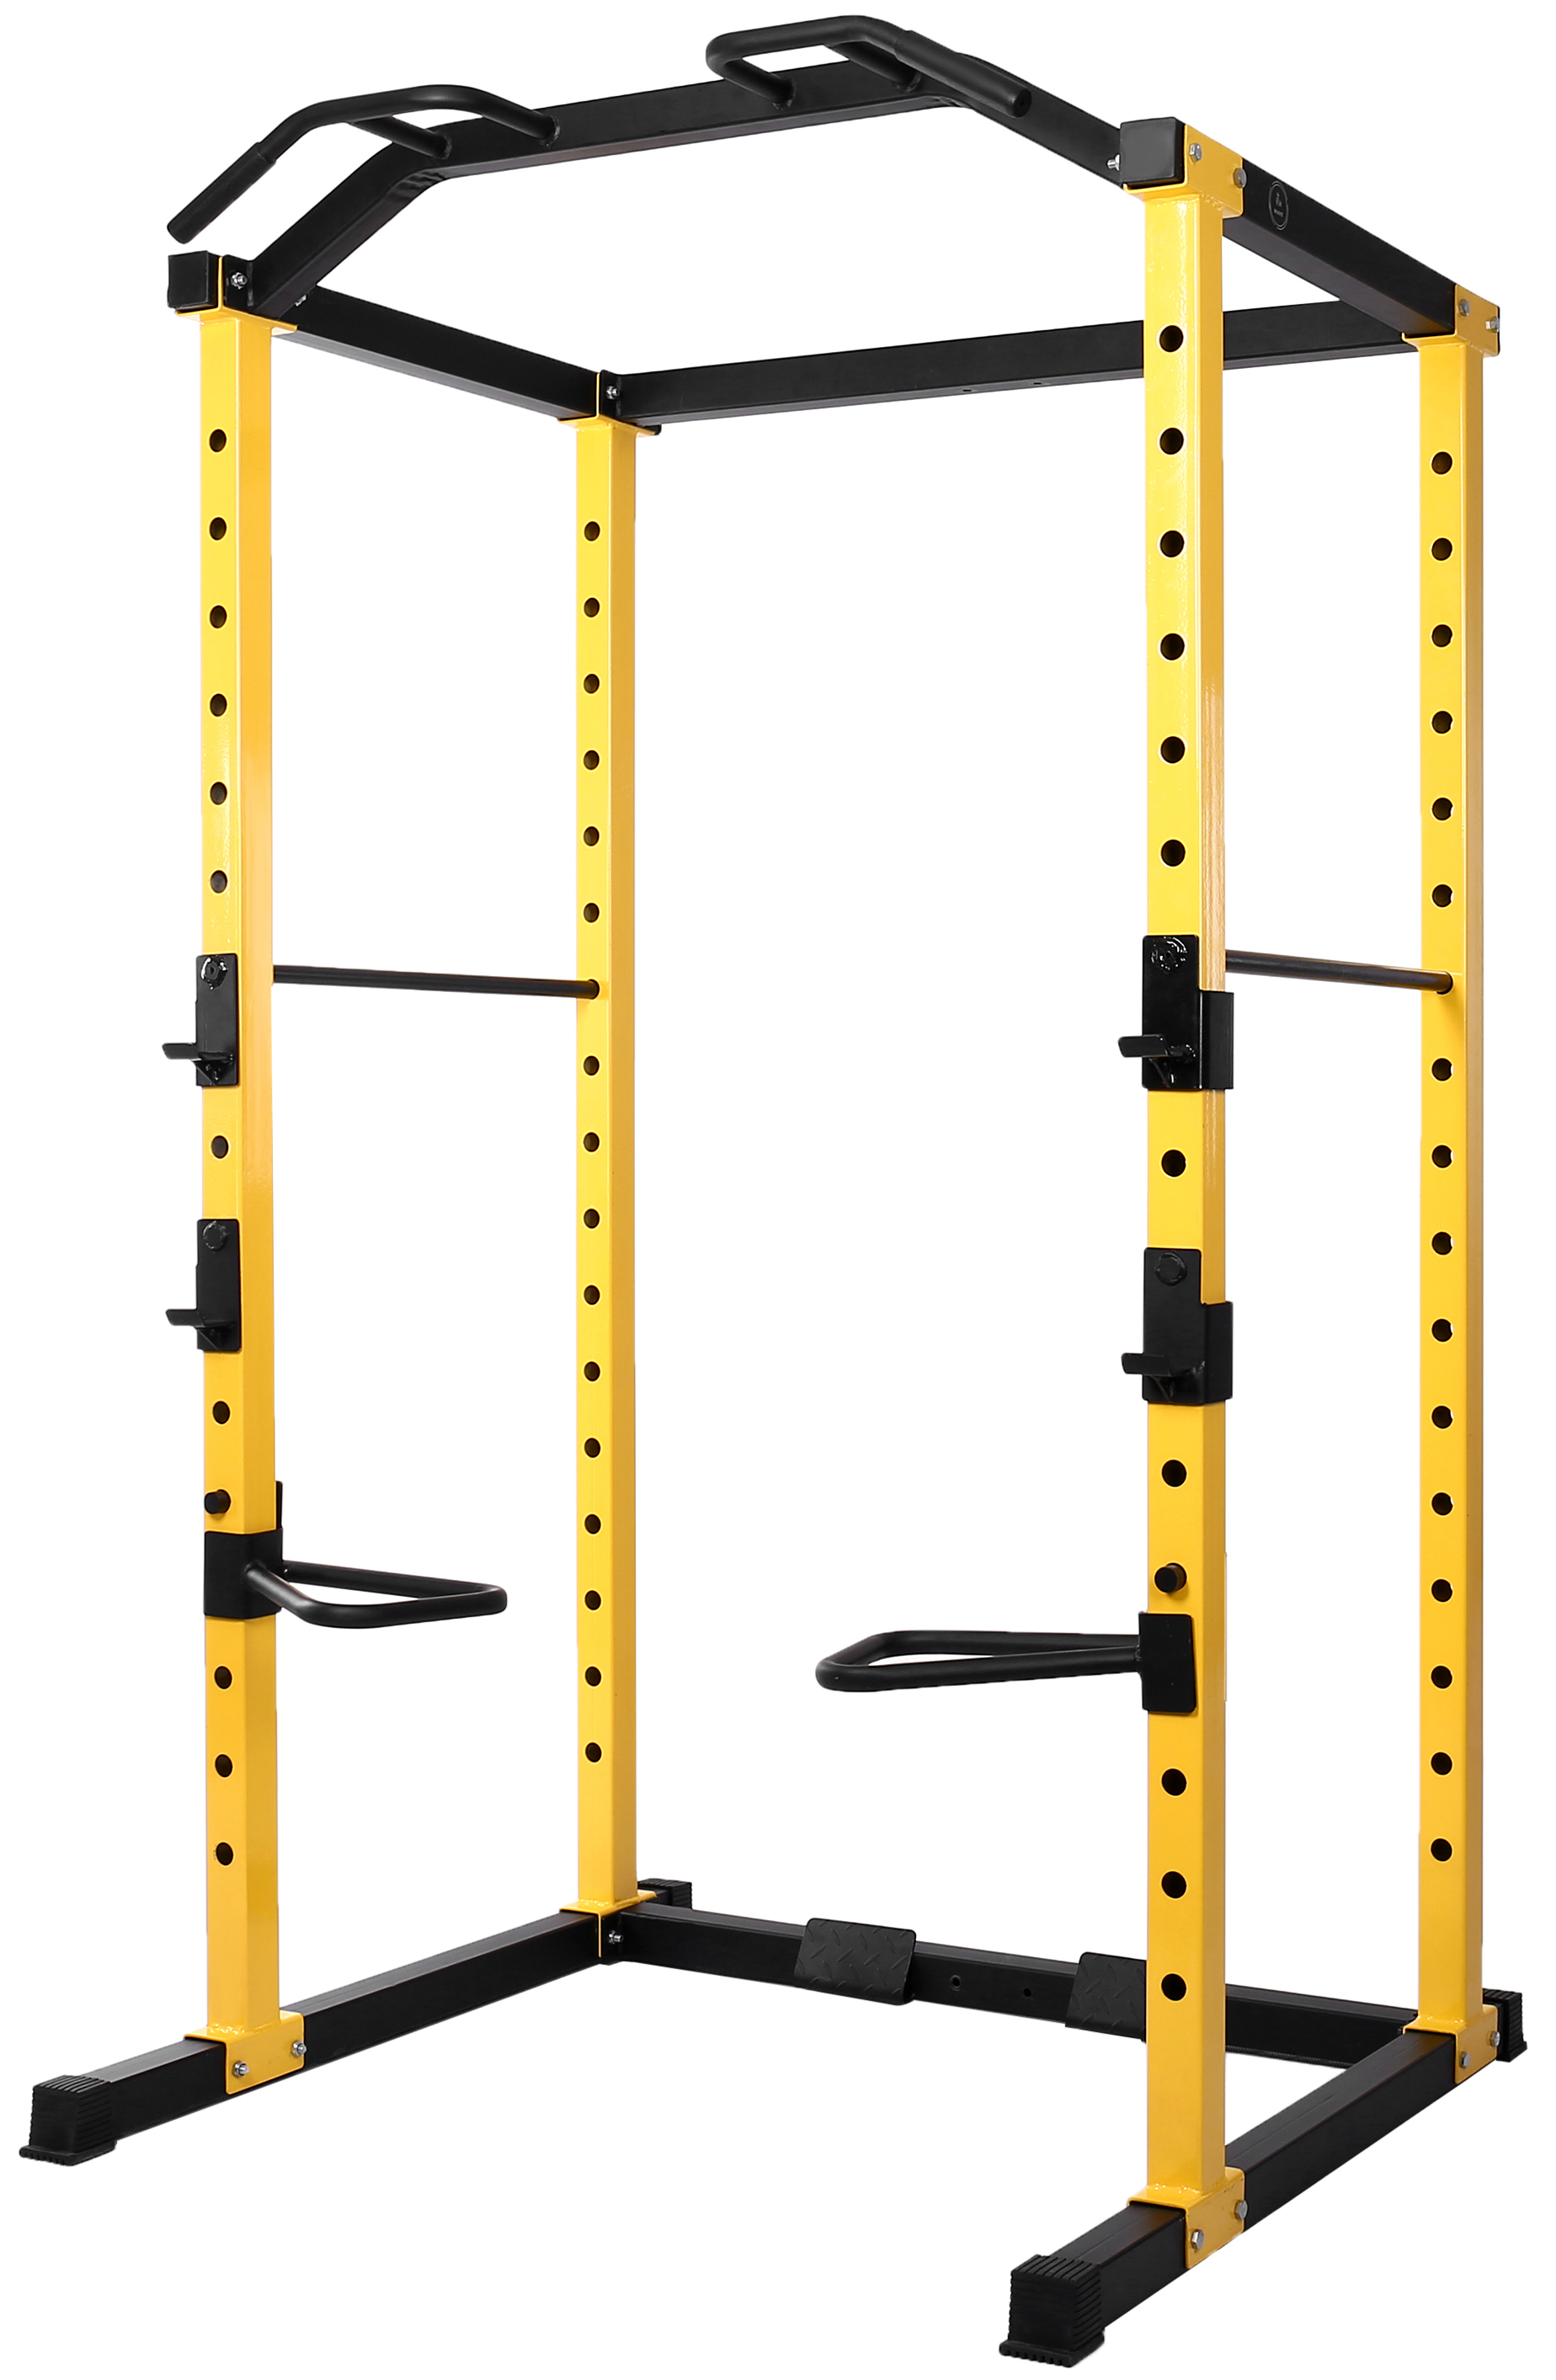 Everyday Essentials 1000-Pound Capacity Power Cage Only